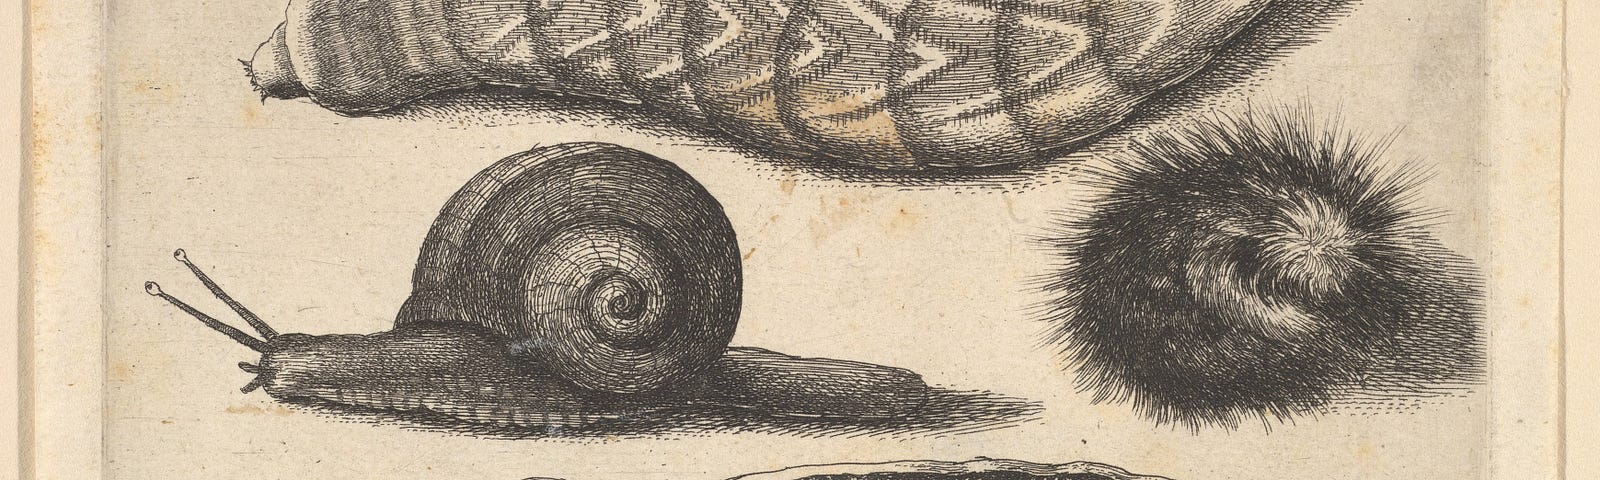 An etching of a fat caterpillar with patterned skin above, two hairy caterpillars, a snail on left and caterpillar with dotted skin moving to left below.